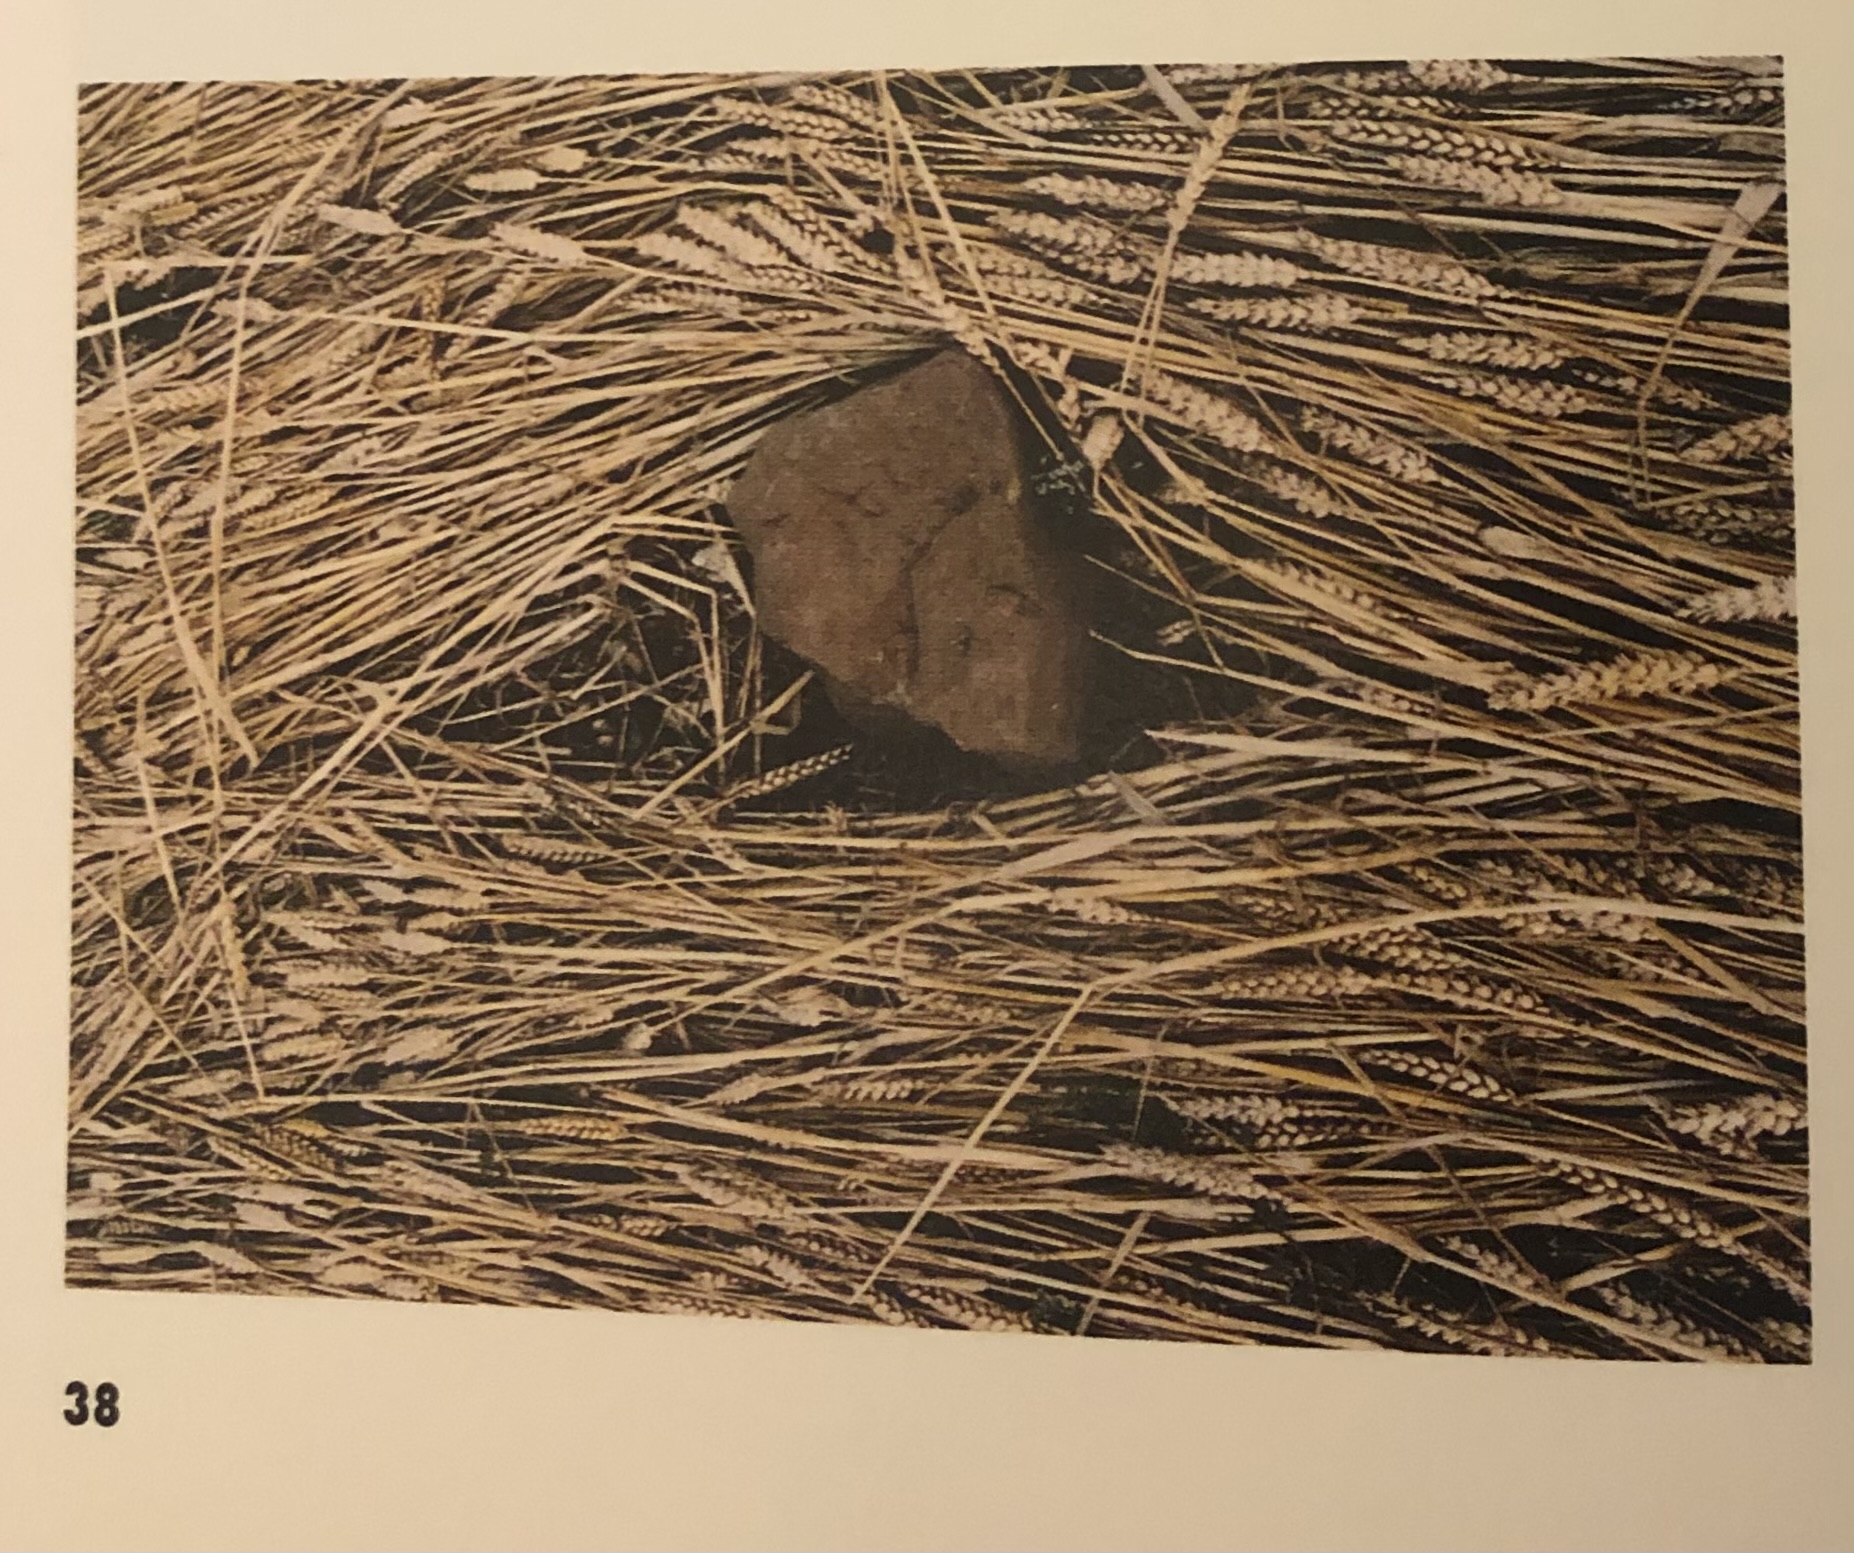 A color photograph labeled '38' depicts an up close aerial view of flattened wheat stalks arranged horizontally, curving around a stone as if the wheat was water in a river moving around the stone.